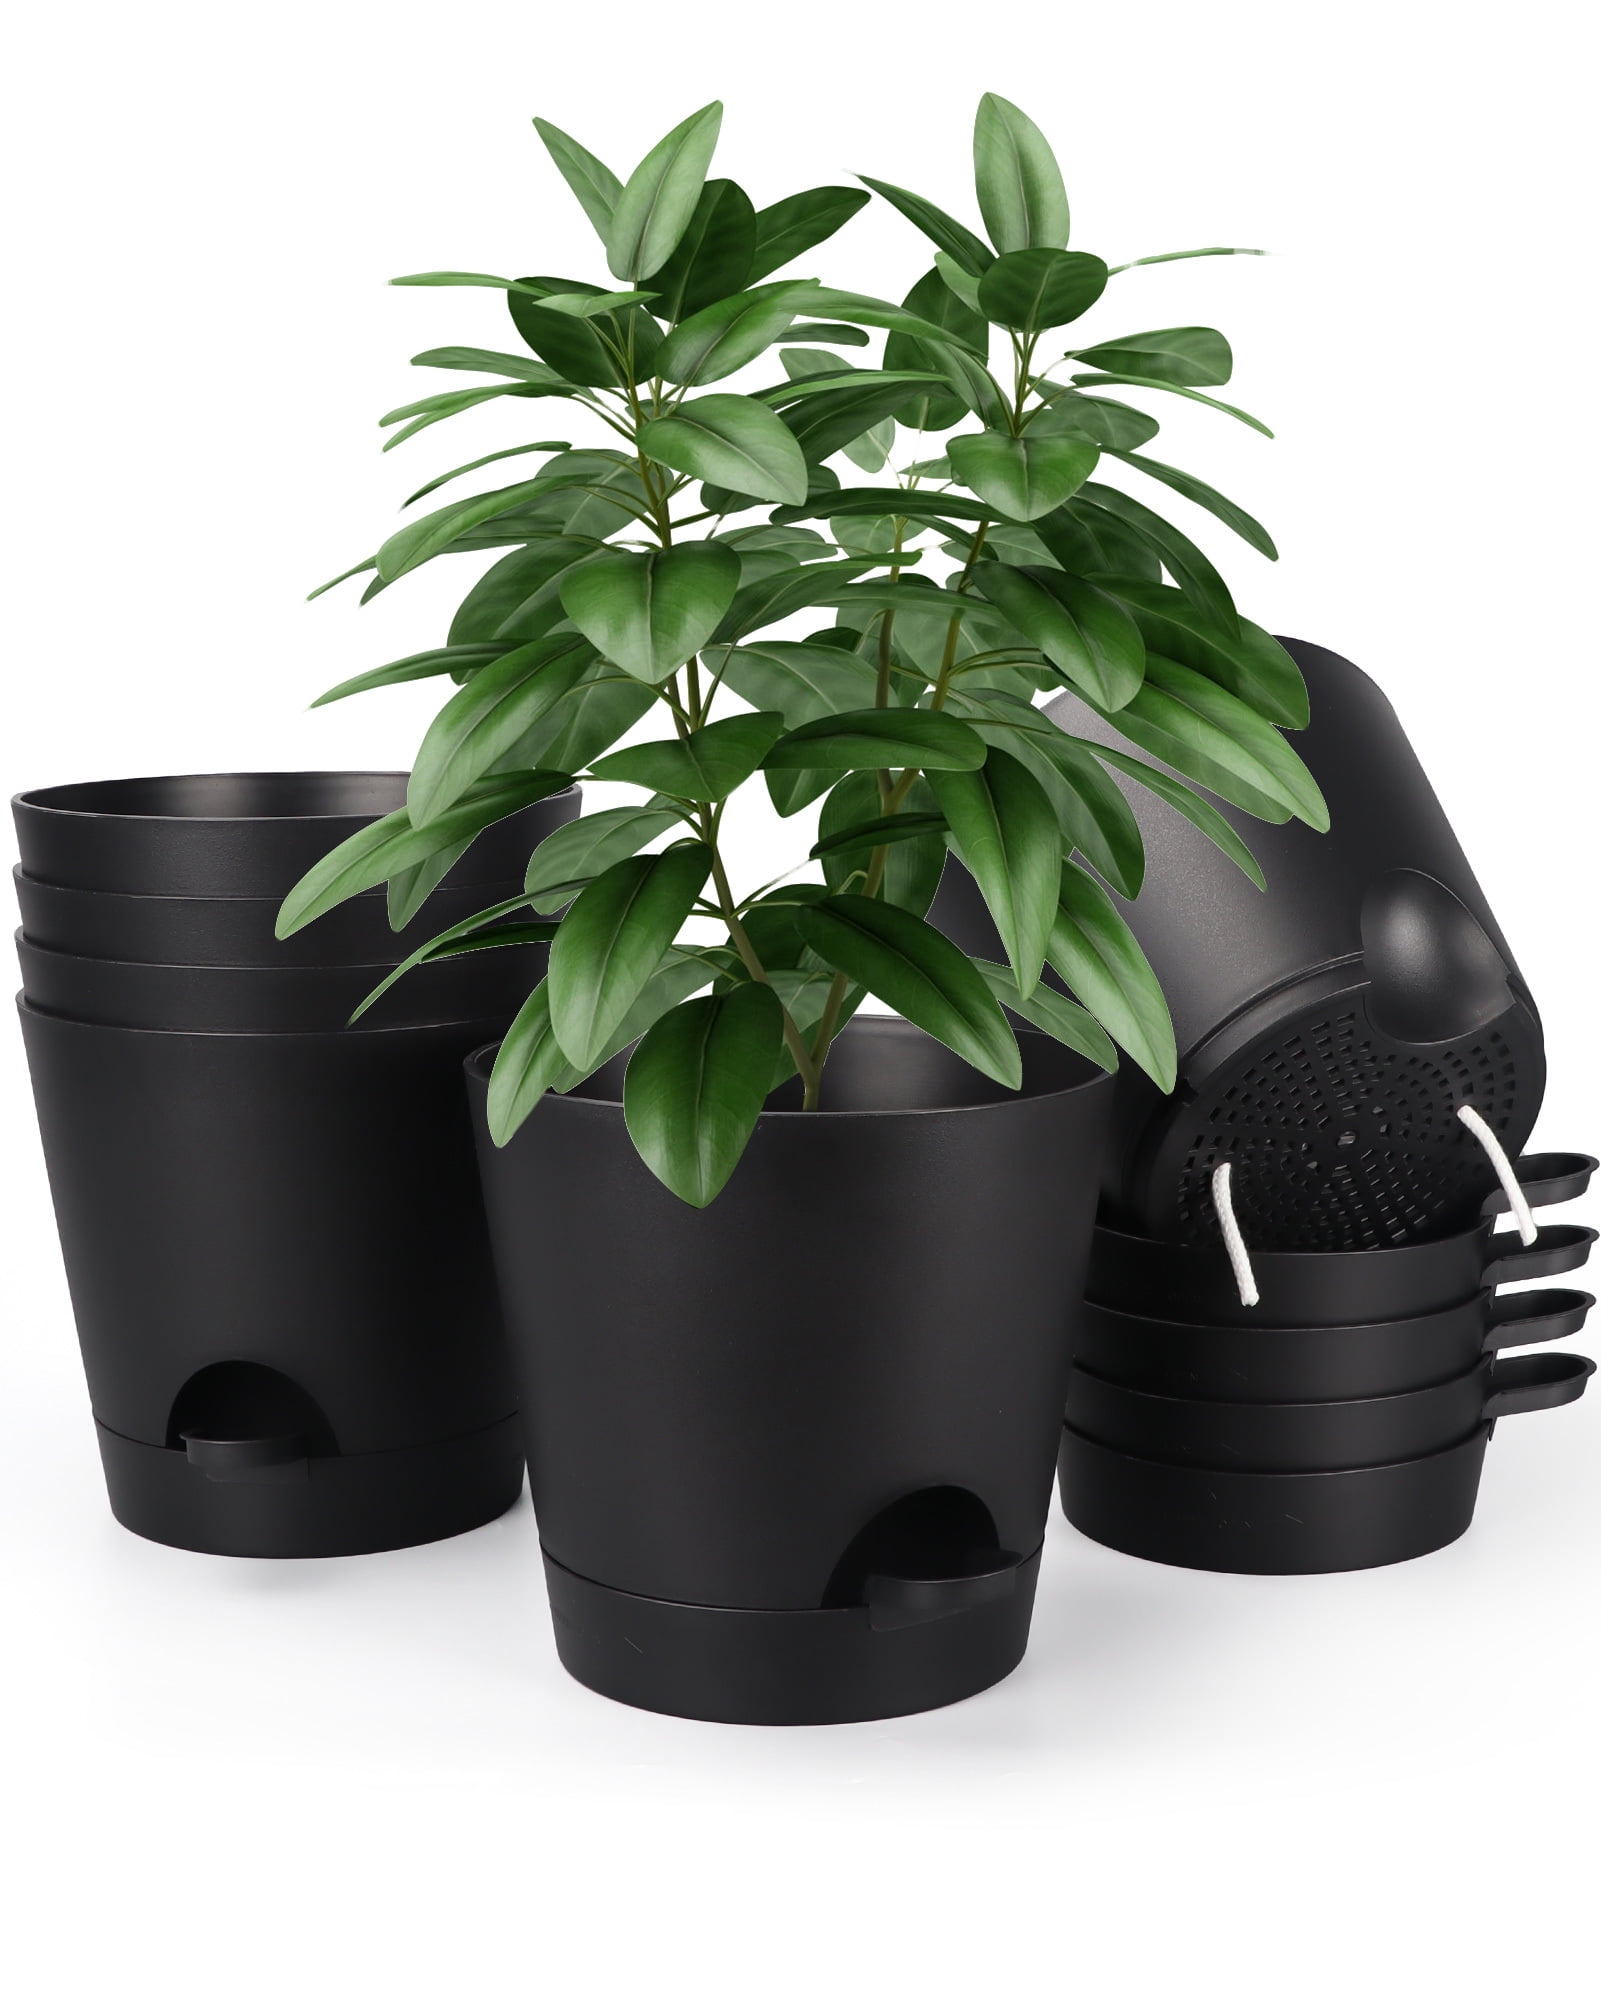 6 Inch Plant Pots Set of 6, Plastic Planter with Drain Holes and Removable Black Flower Pot with Watering Lip for Indoor House Plants - Walmart.com